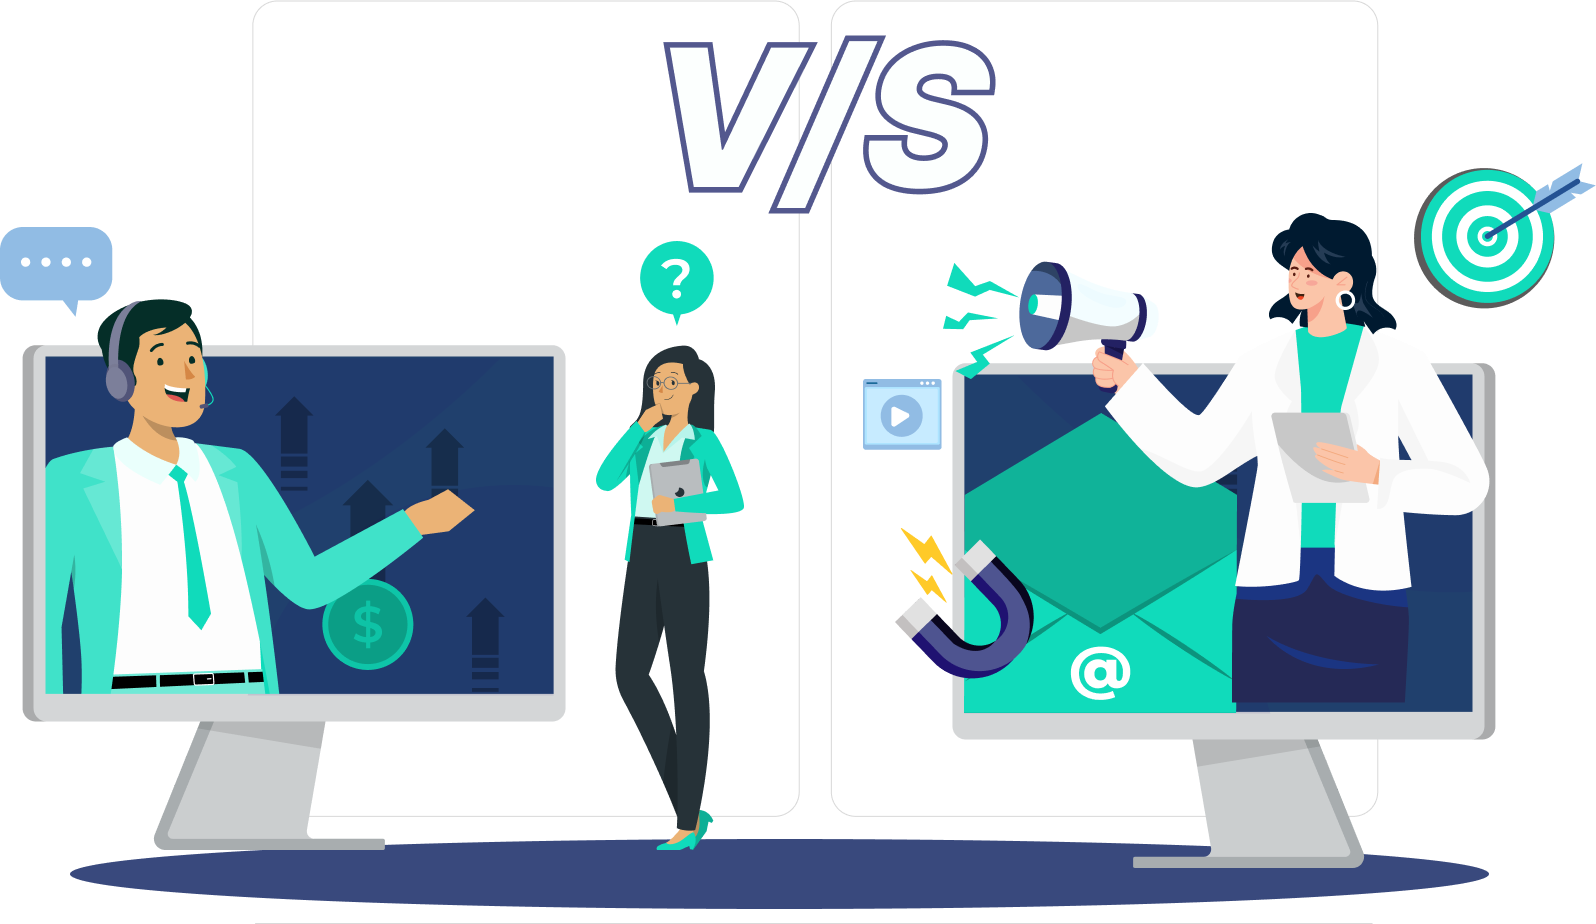 SDR vs BDR  – Who Should You Hire for Your Growing SaaS?